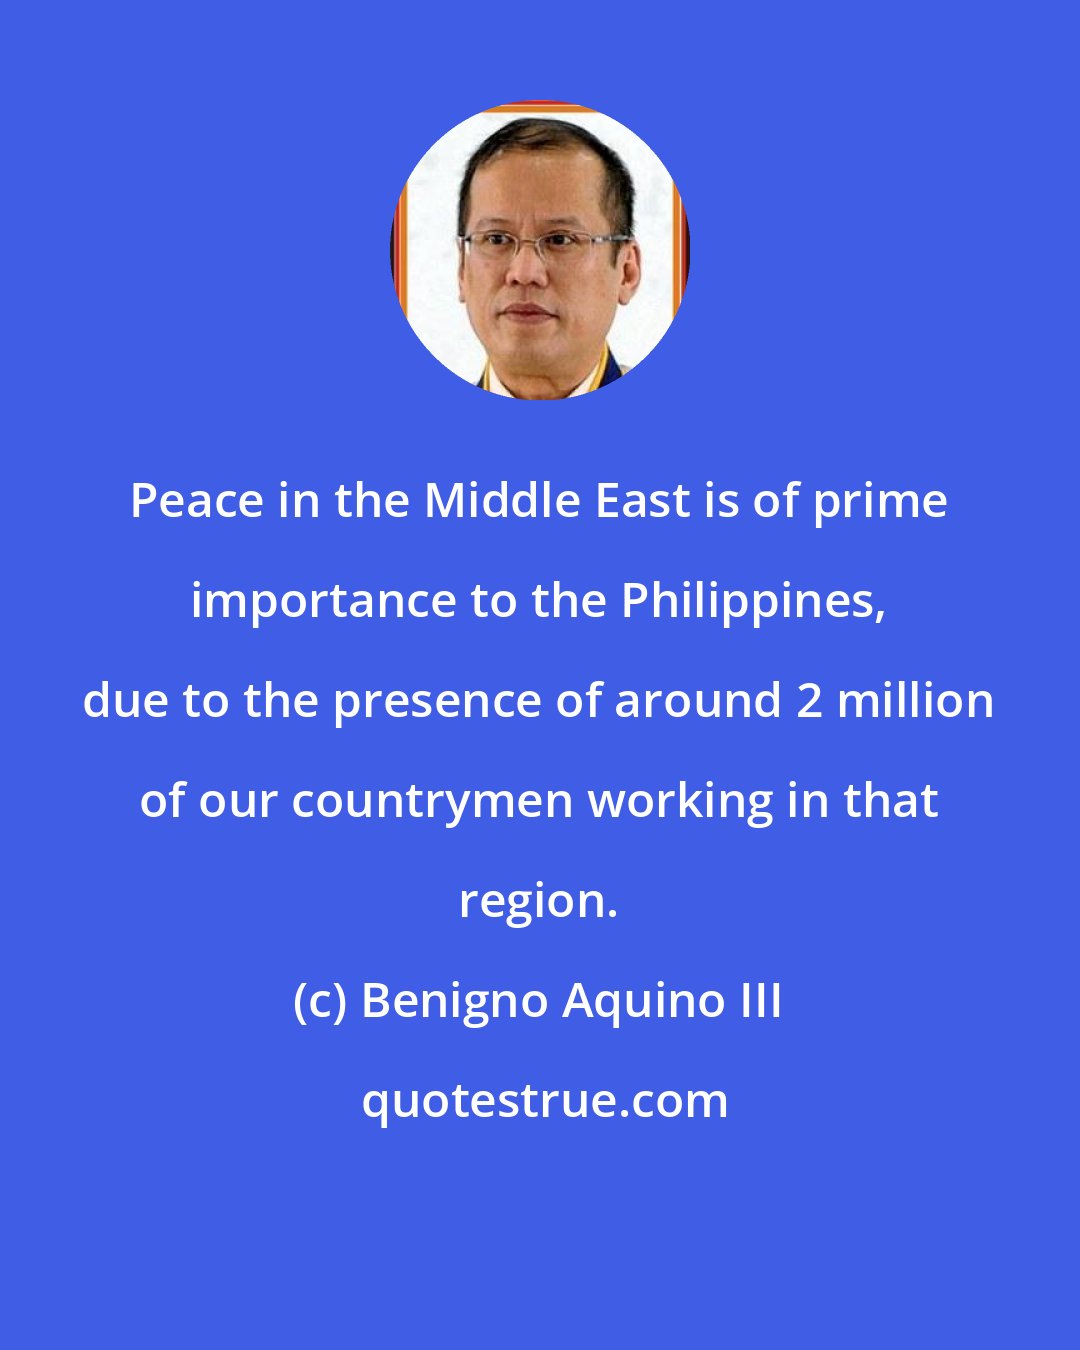 Benigno Aquino III: Peace in the Middle East is of prime importance to the Philippines, due to the presence of around 2 million of our countrymen working in that region.